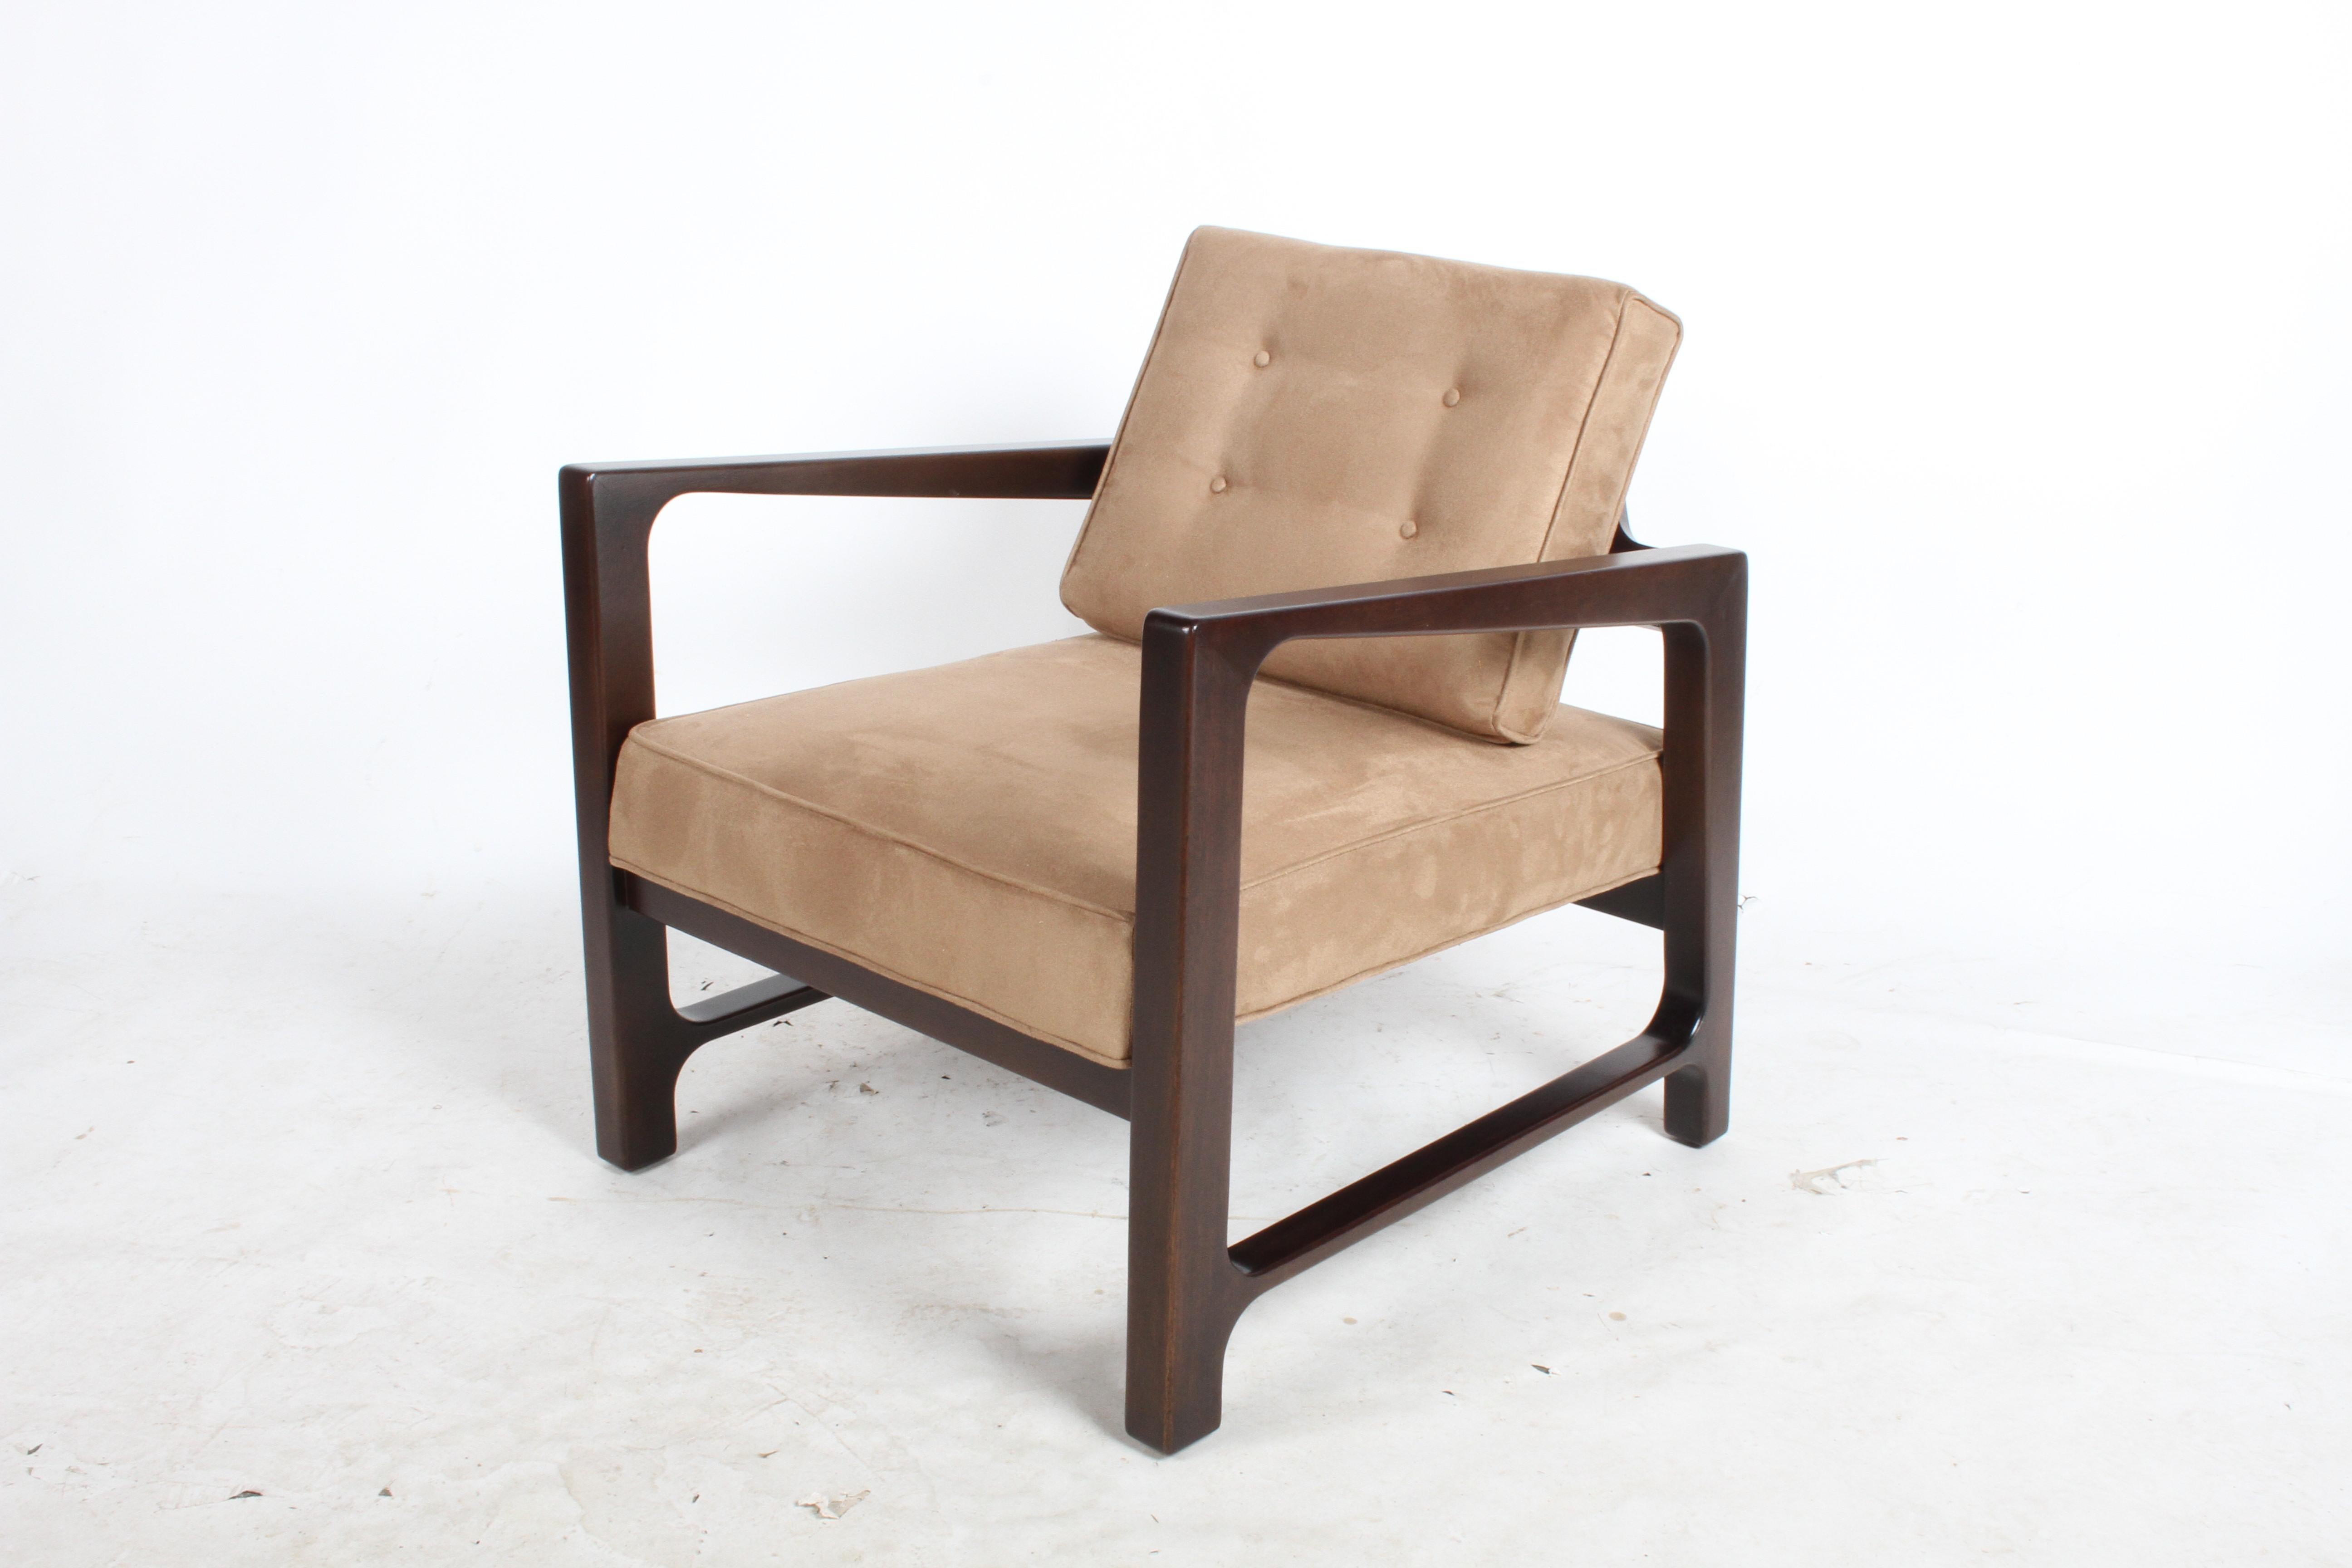 Classic Probber designed lounge chair that evokes the true spirit of the Mid-Century Modern movement. The mahogany frame has been refinished in a medium espresso stain and reupholstered in a tan suede. Probber and Edward Wormley for Dunbar have a